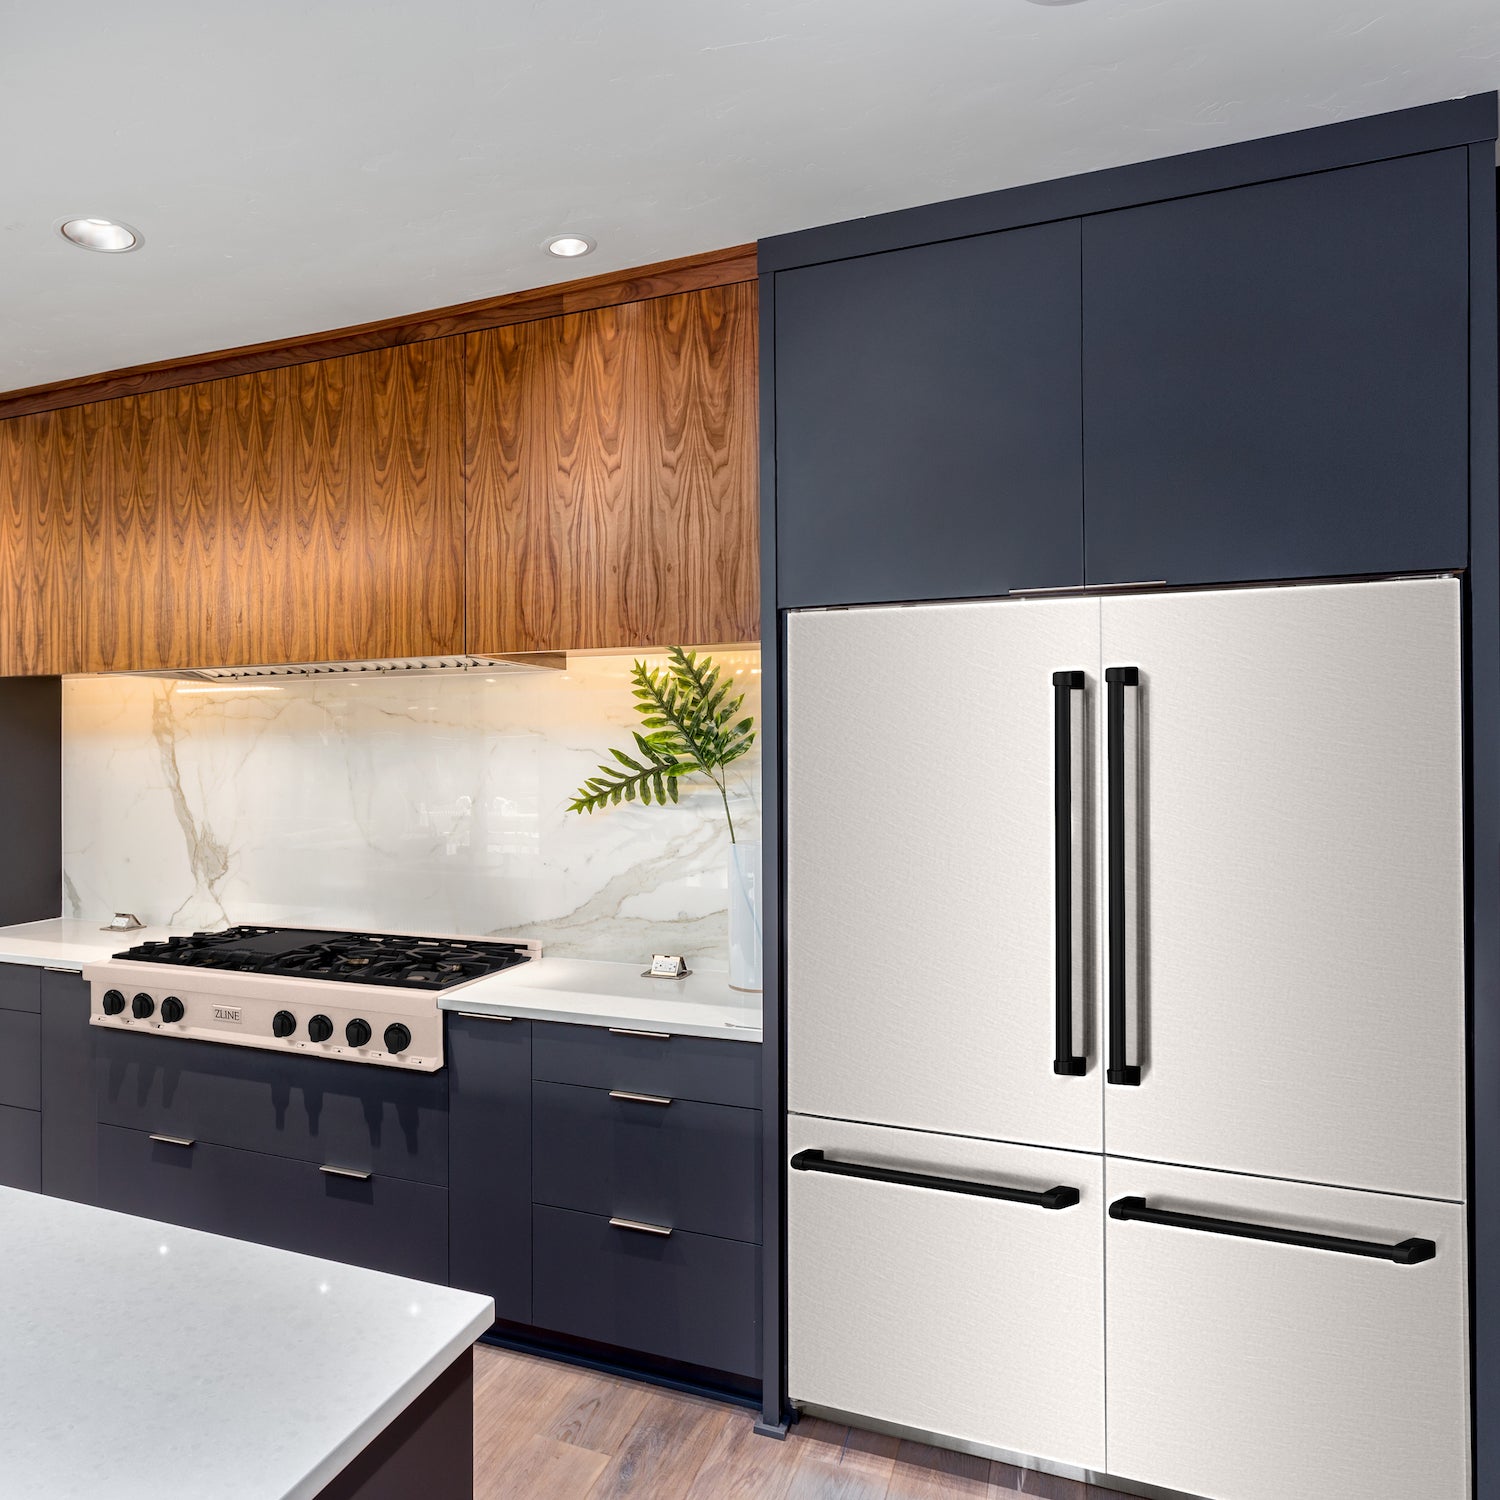 ZLINE 60" Autograph Edition Built-in Refrigerator with Accent Handles in a kitchen with blue cabinetry.